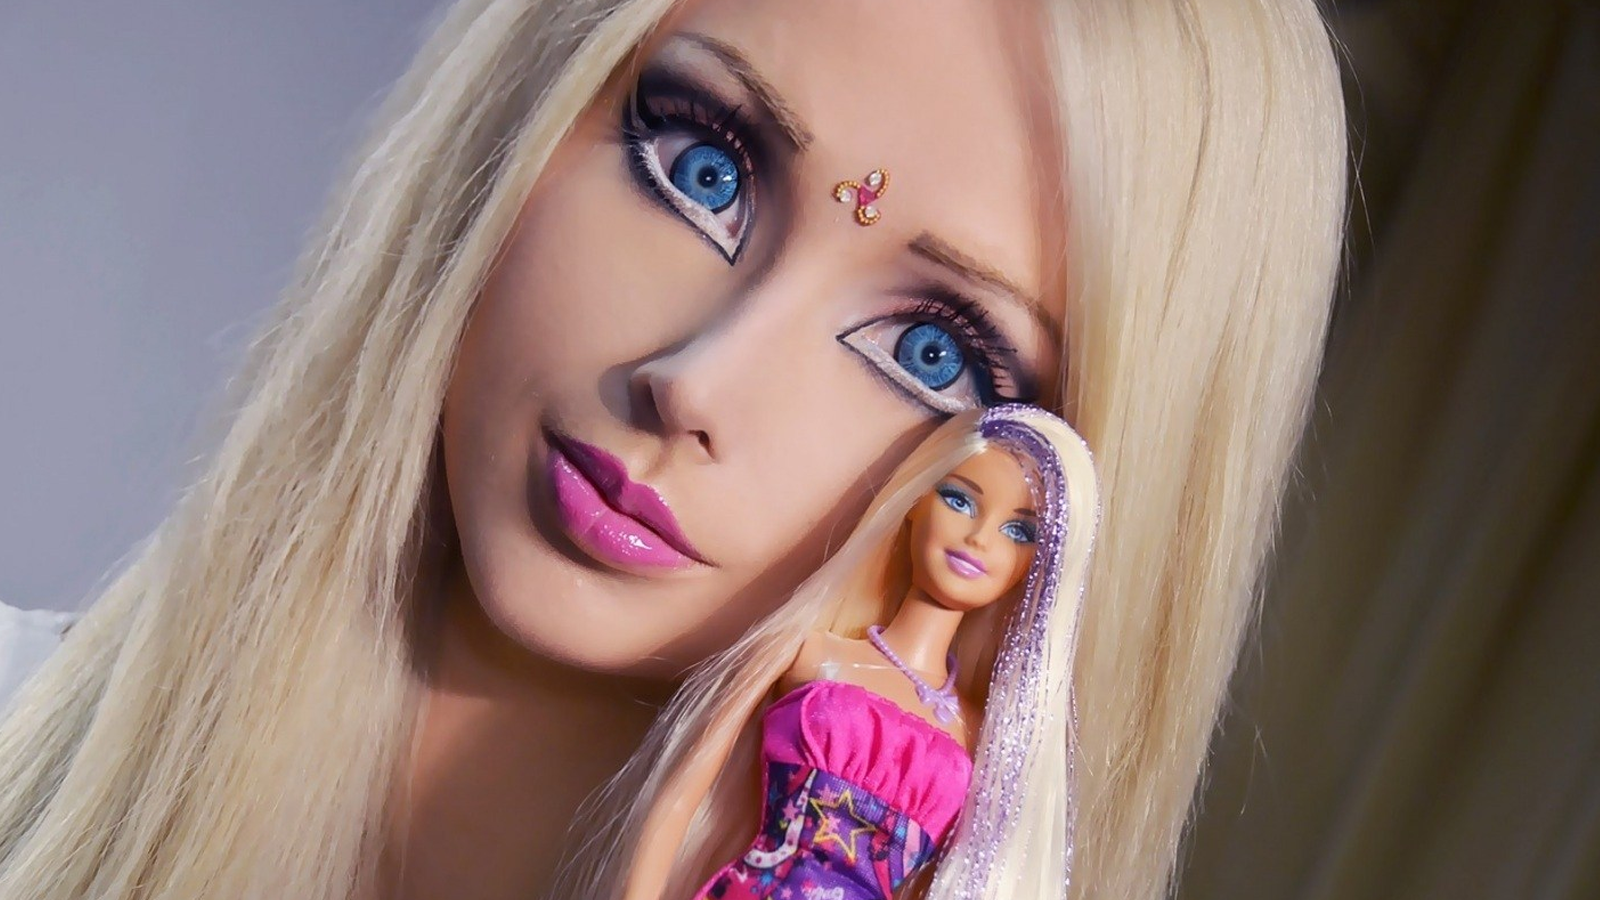 Real Barbie Beauty, only 22 waists, but not her boyfriend, until she took off her Barbie makeup